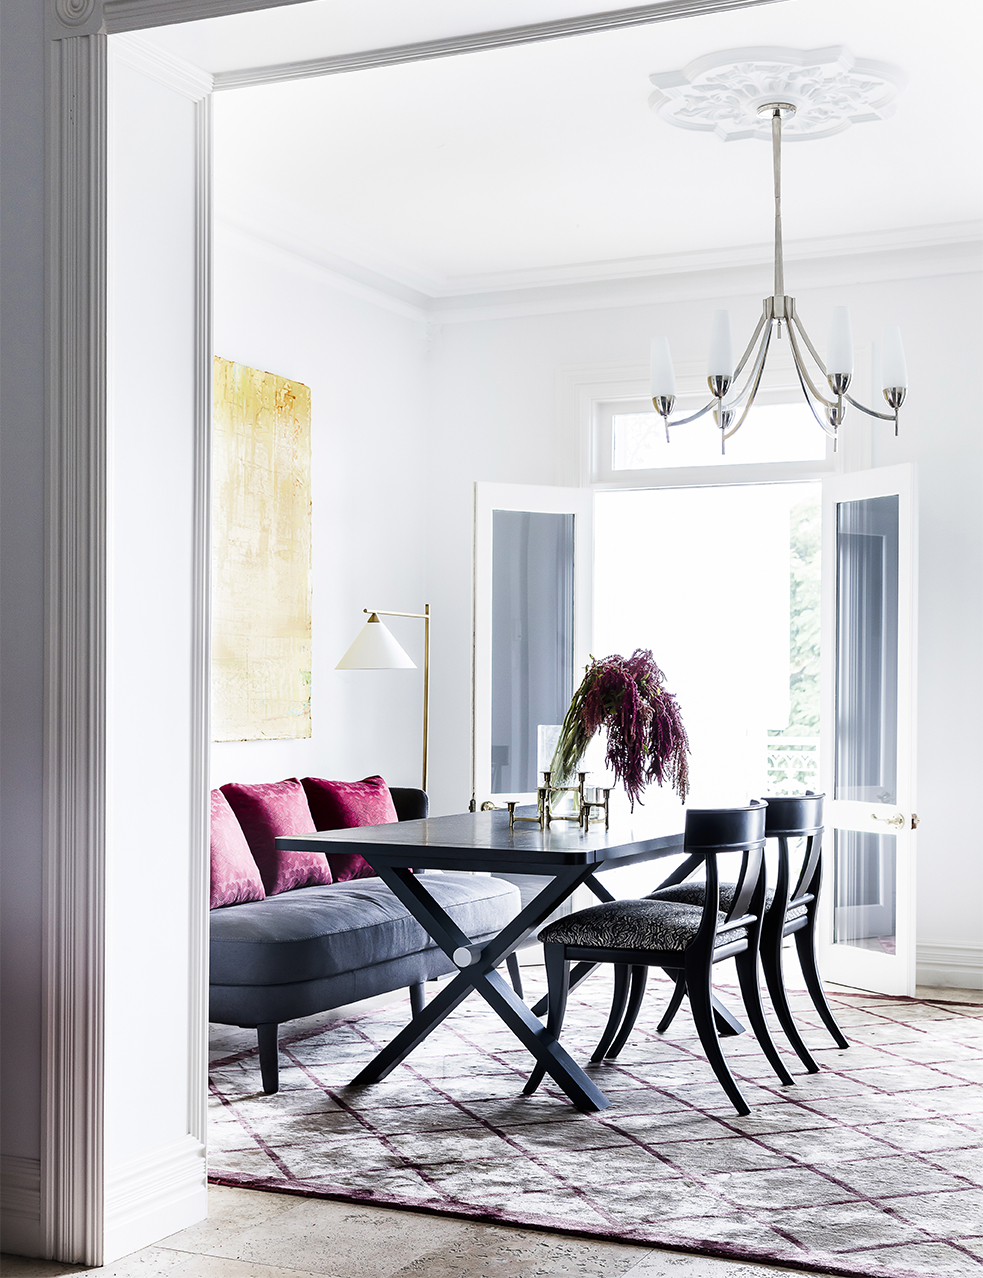 Dining Room By Brendan Wong Design with pink cushions, black table and grey banket style sofa.